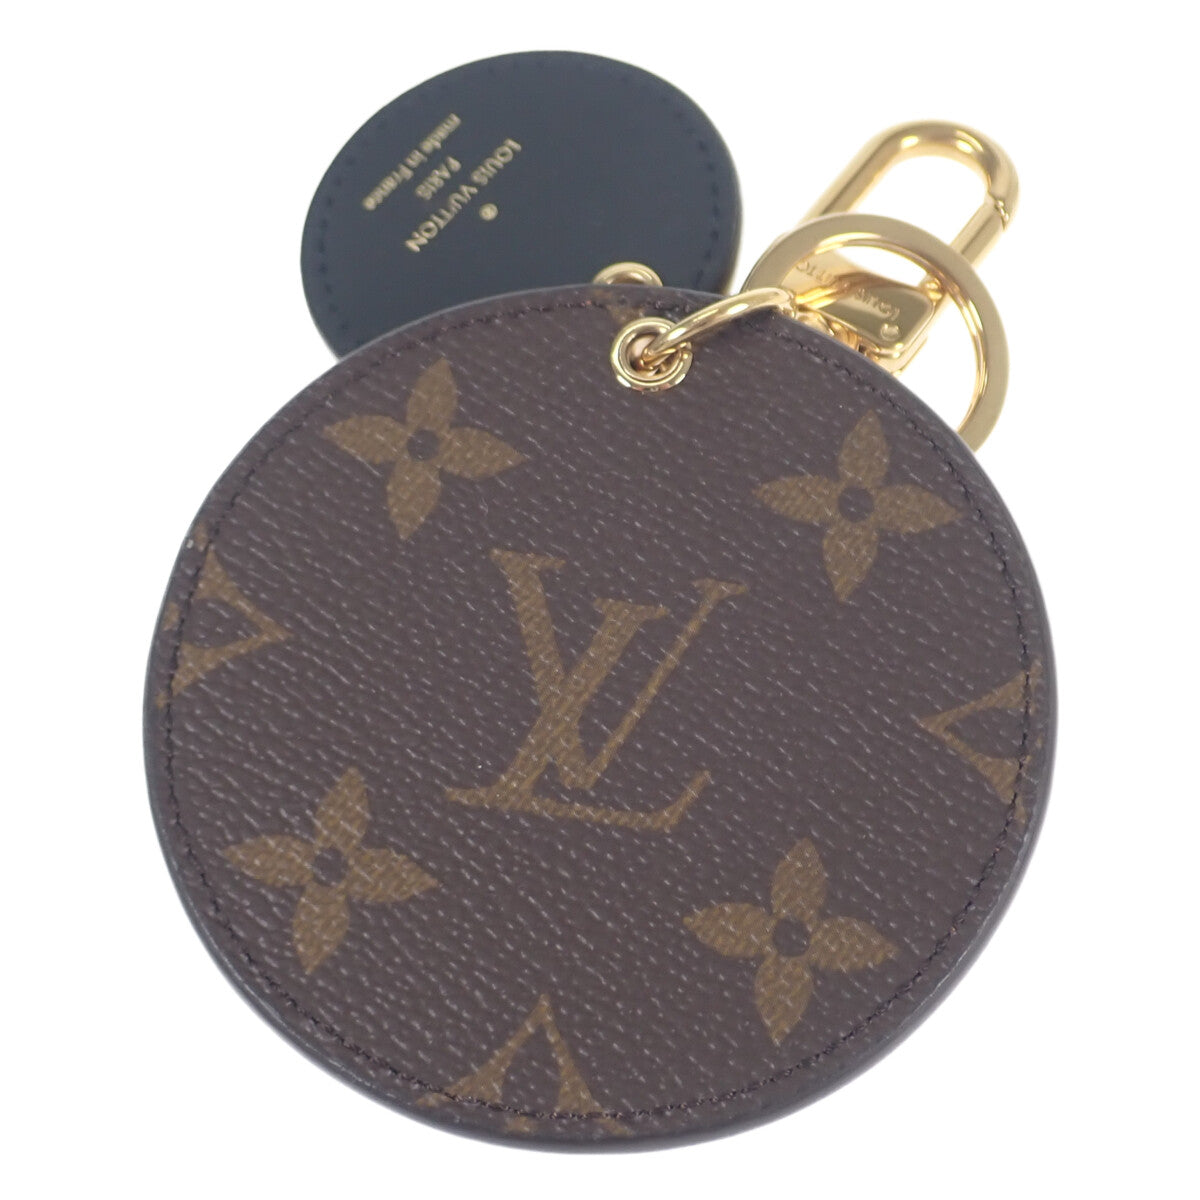 Louis Vuitton Monogram Reverse Key Holder and Bag Charm Canvas Other M69317 in Excellent condition